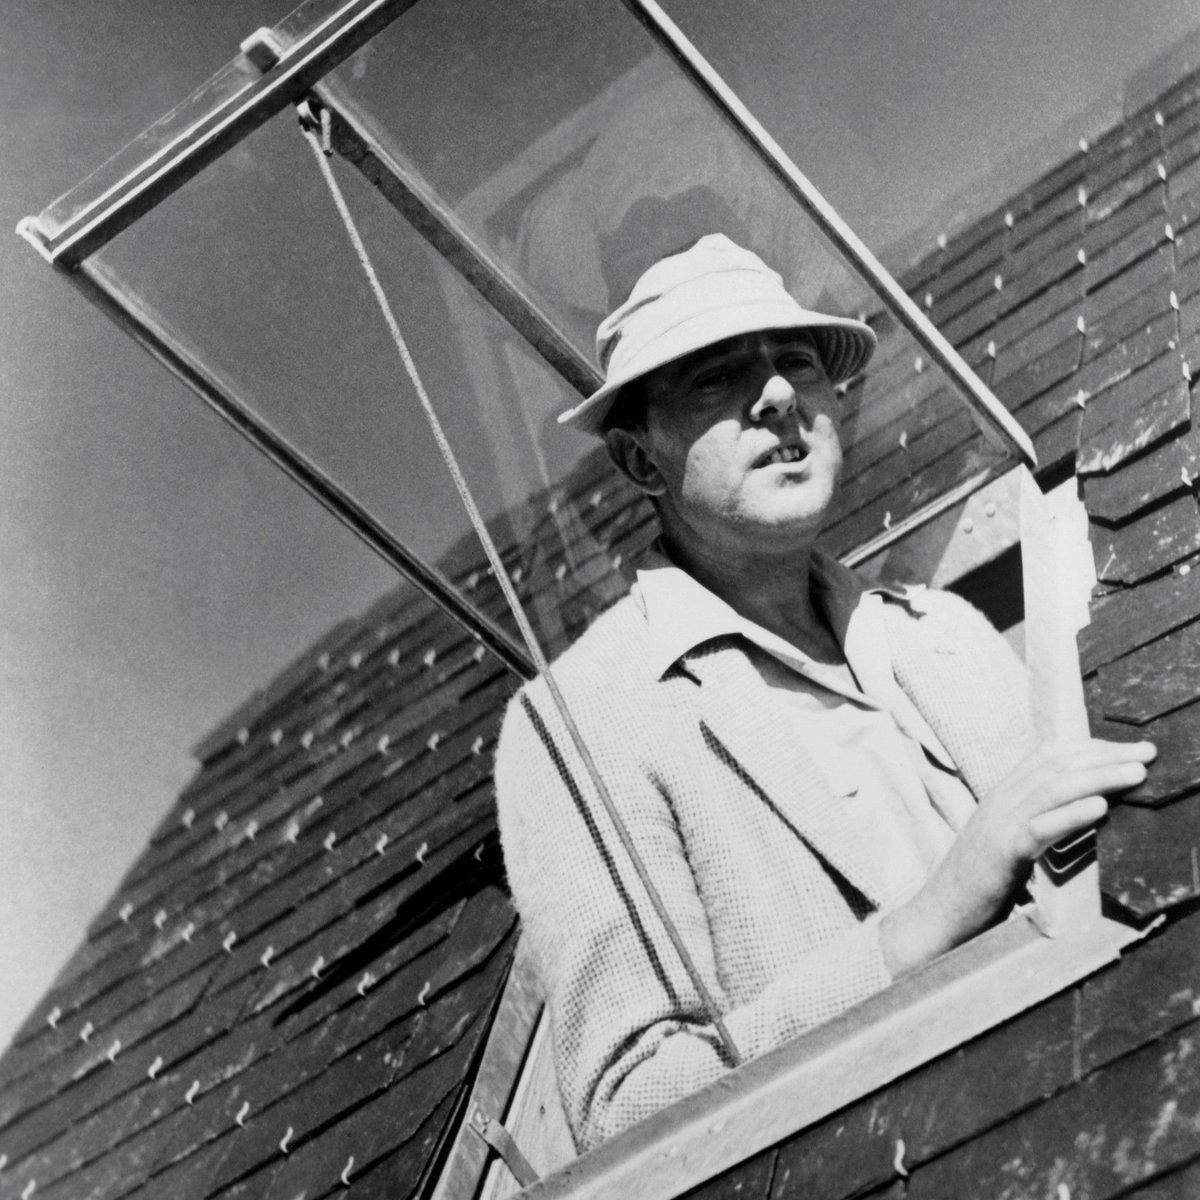 Last call for a Jacques Tati comedy classic in 35mm! Our final showing of MONSIEUR HULOT'S HOLIDAY (1953) starts today, Sunday May 19th, at 2:00pm.